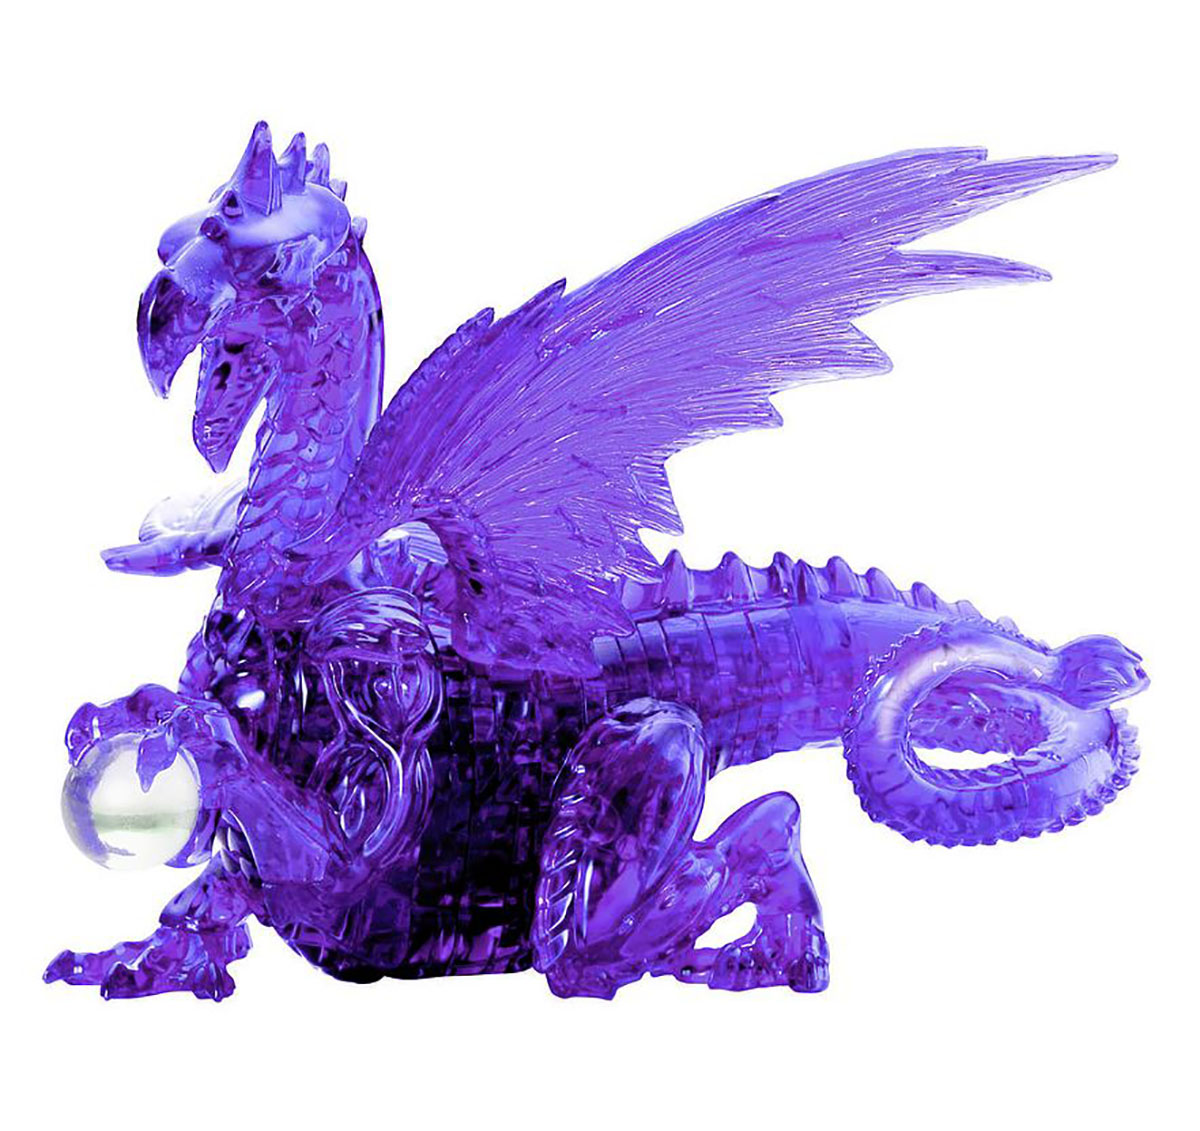 Red Dragon Deluxe 3D Crystal Puzzle Dragon Crystal Puzzle By Bepuzzled